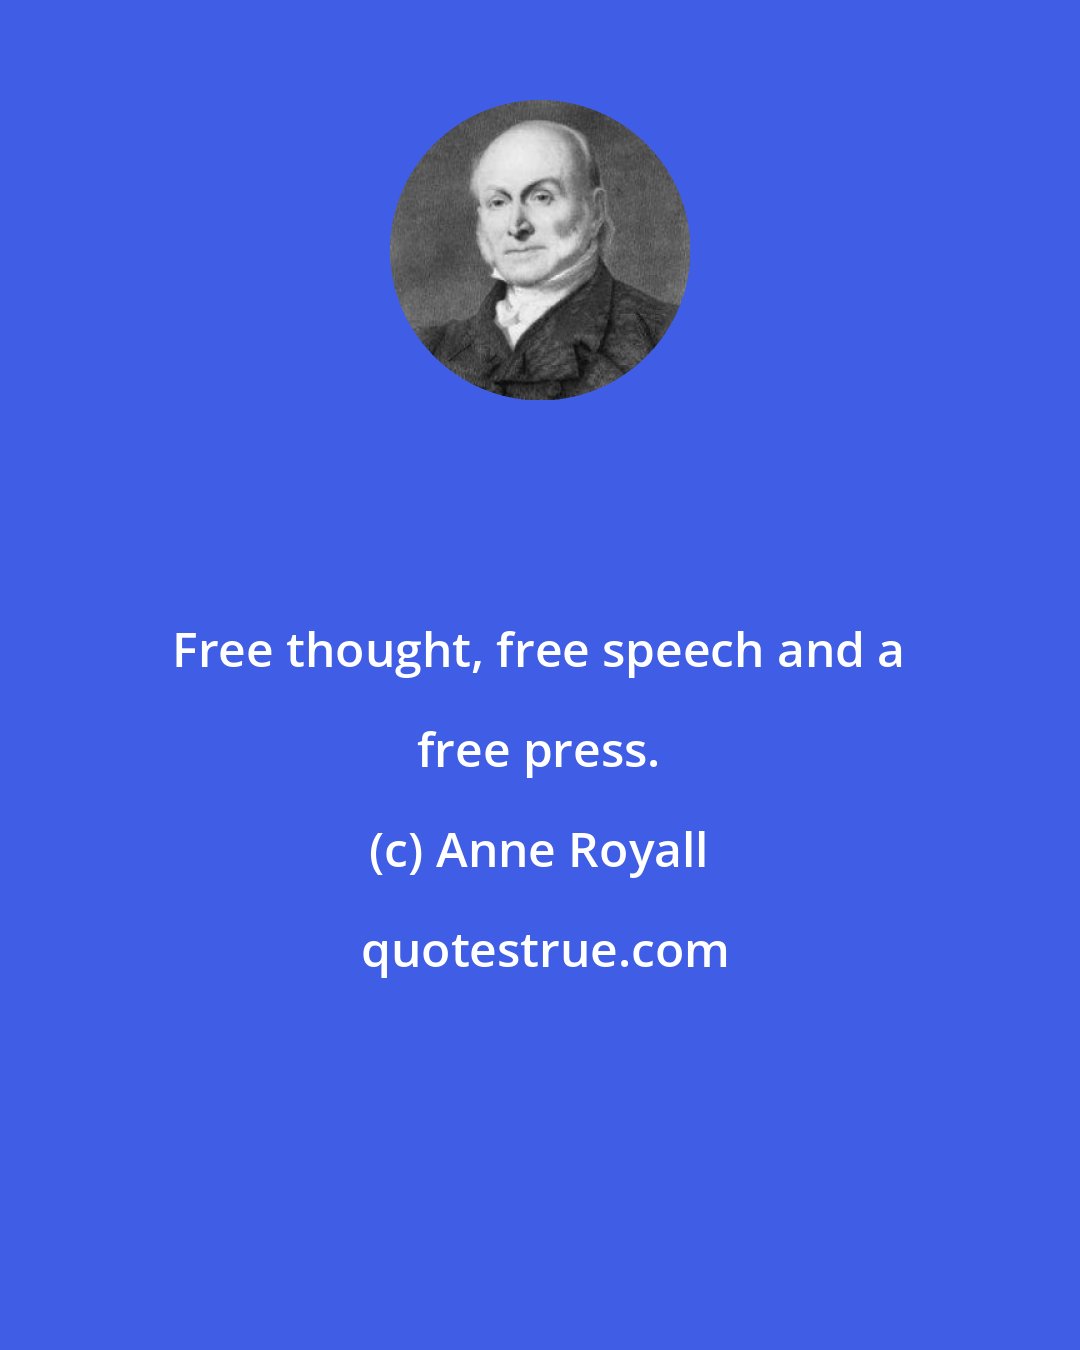 Anne Royall: Free thought, free speech and a free press.